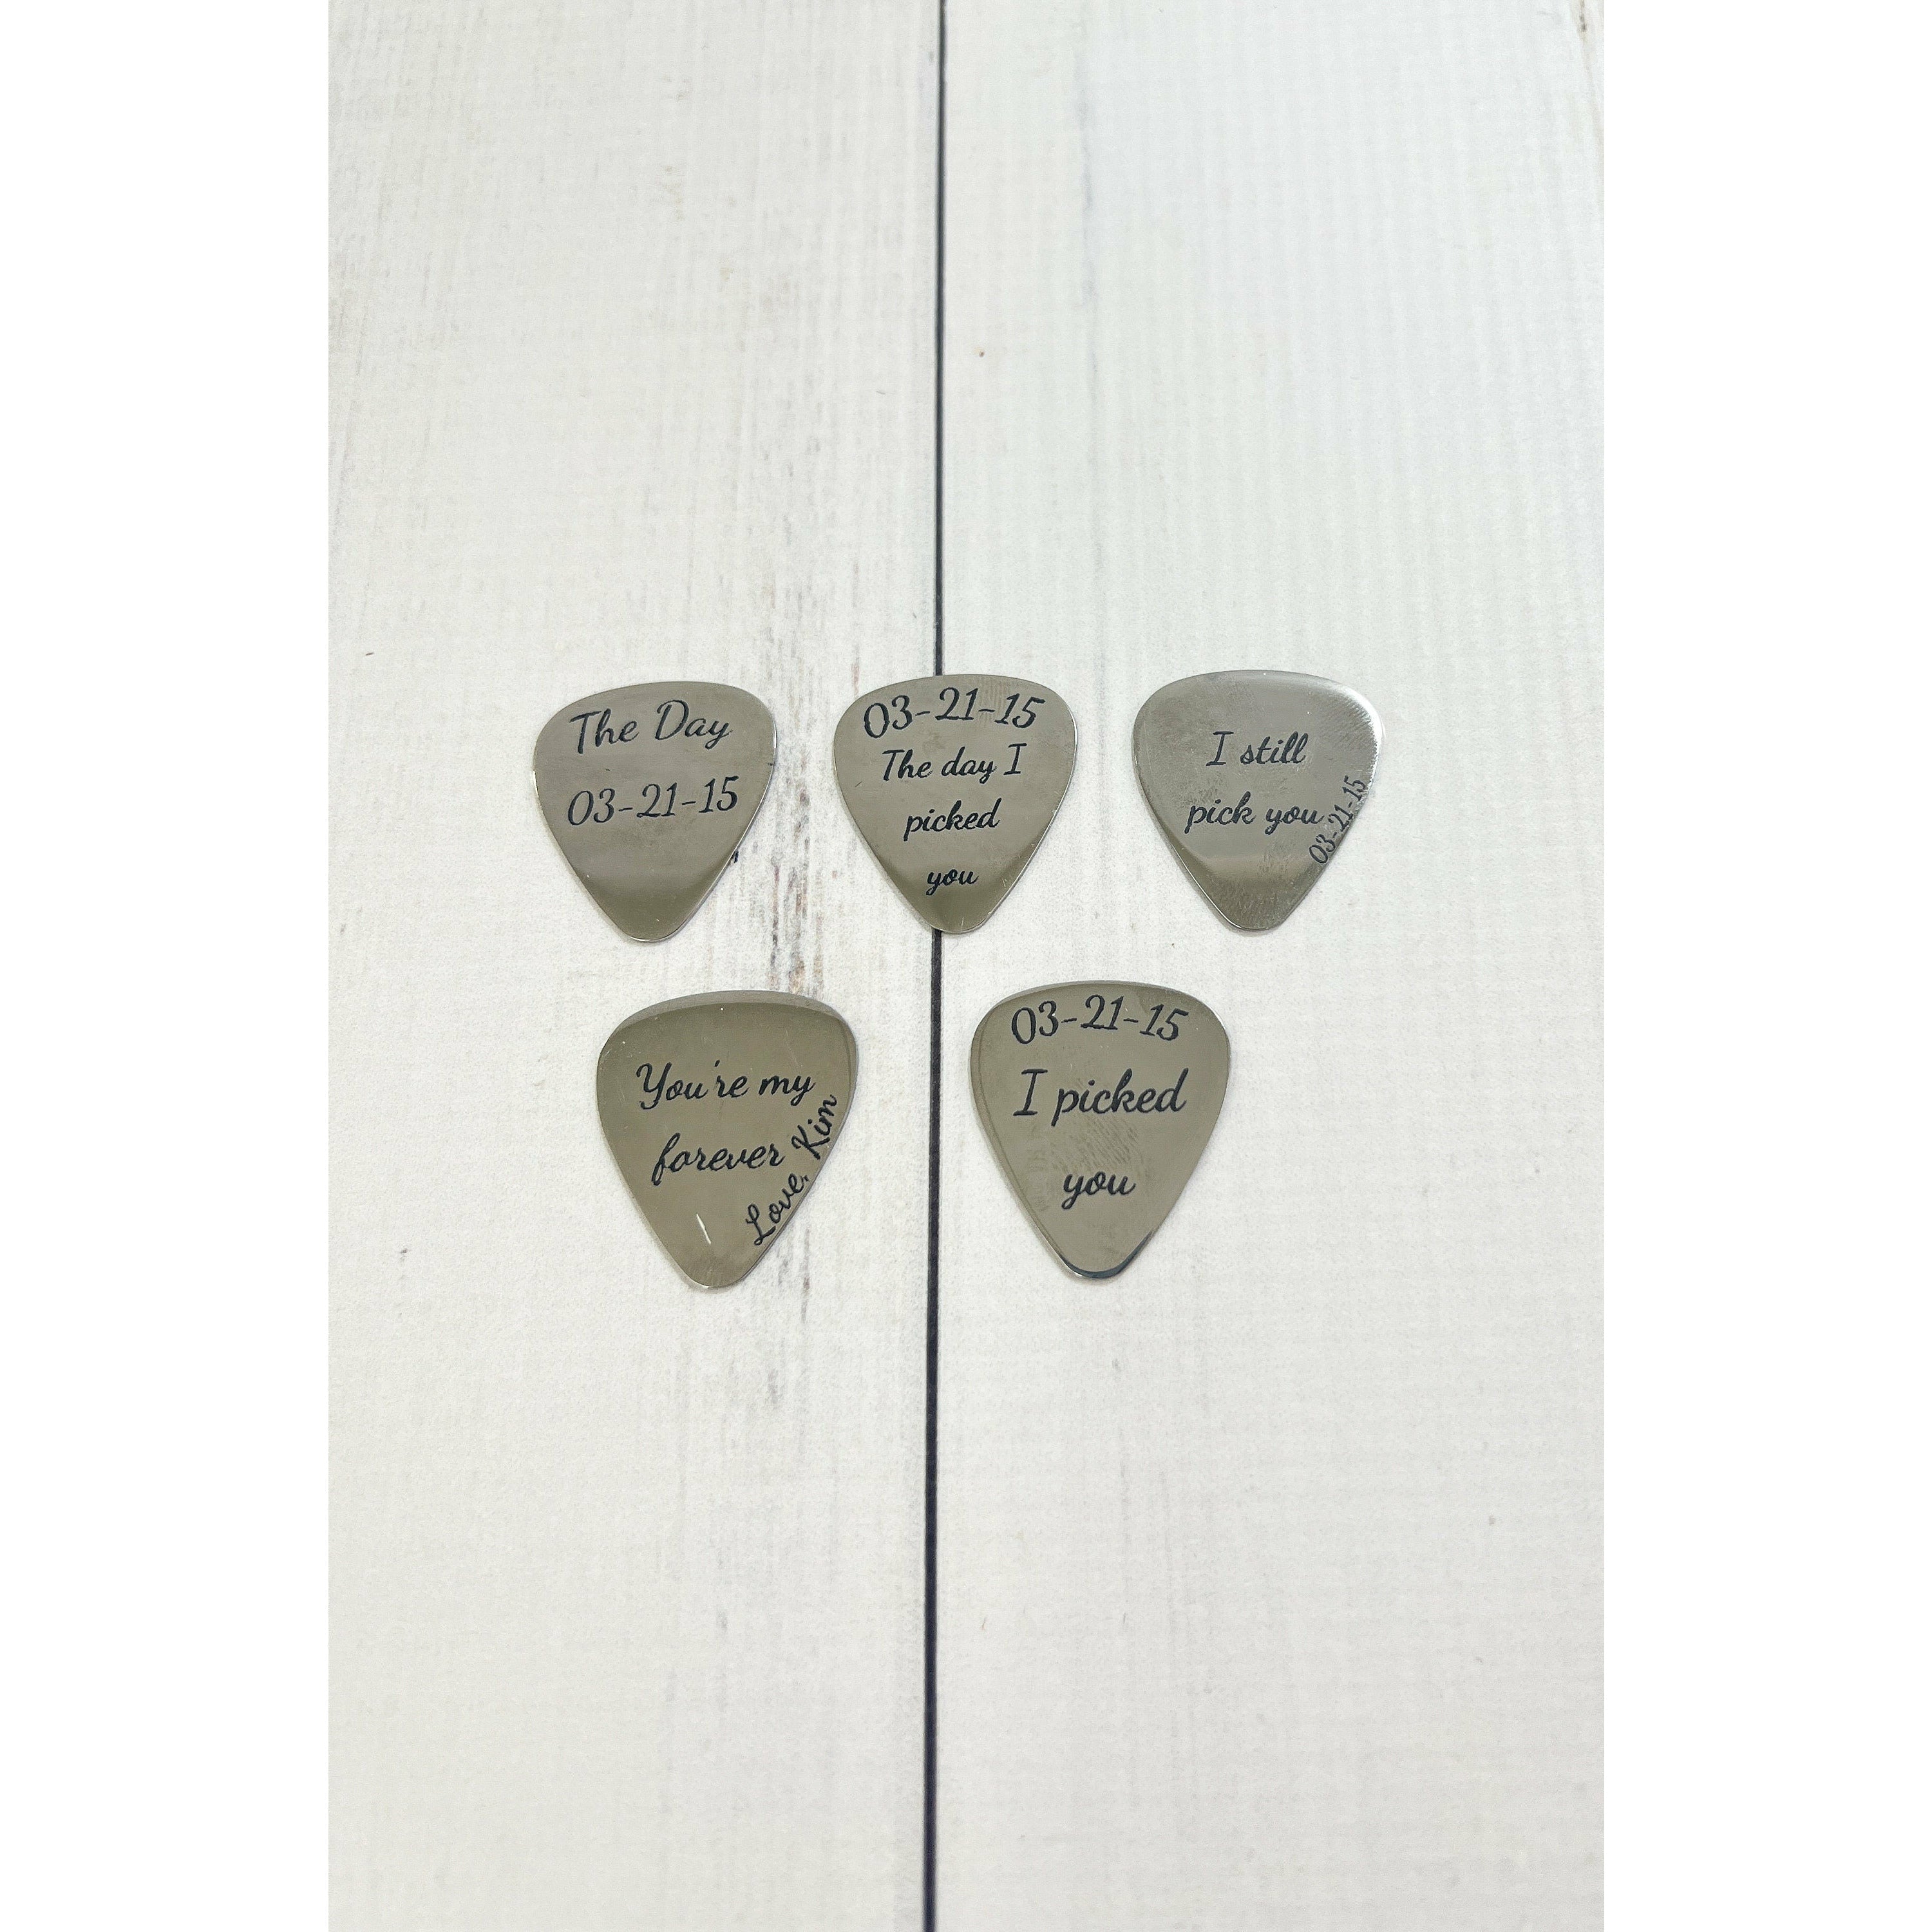 Personalized Metal Guitar Pick With Guitar Pick Holder